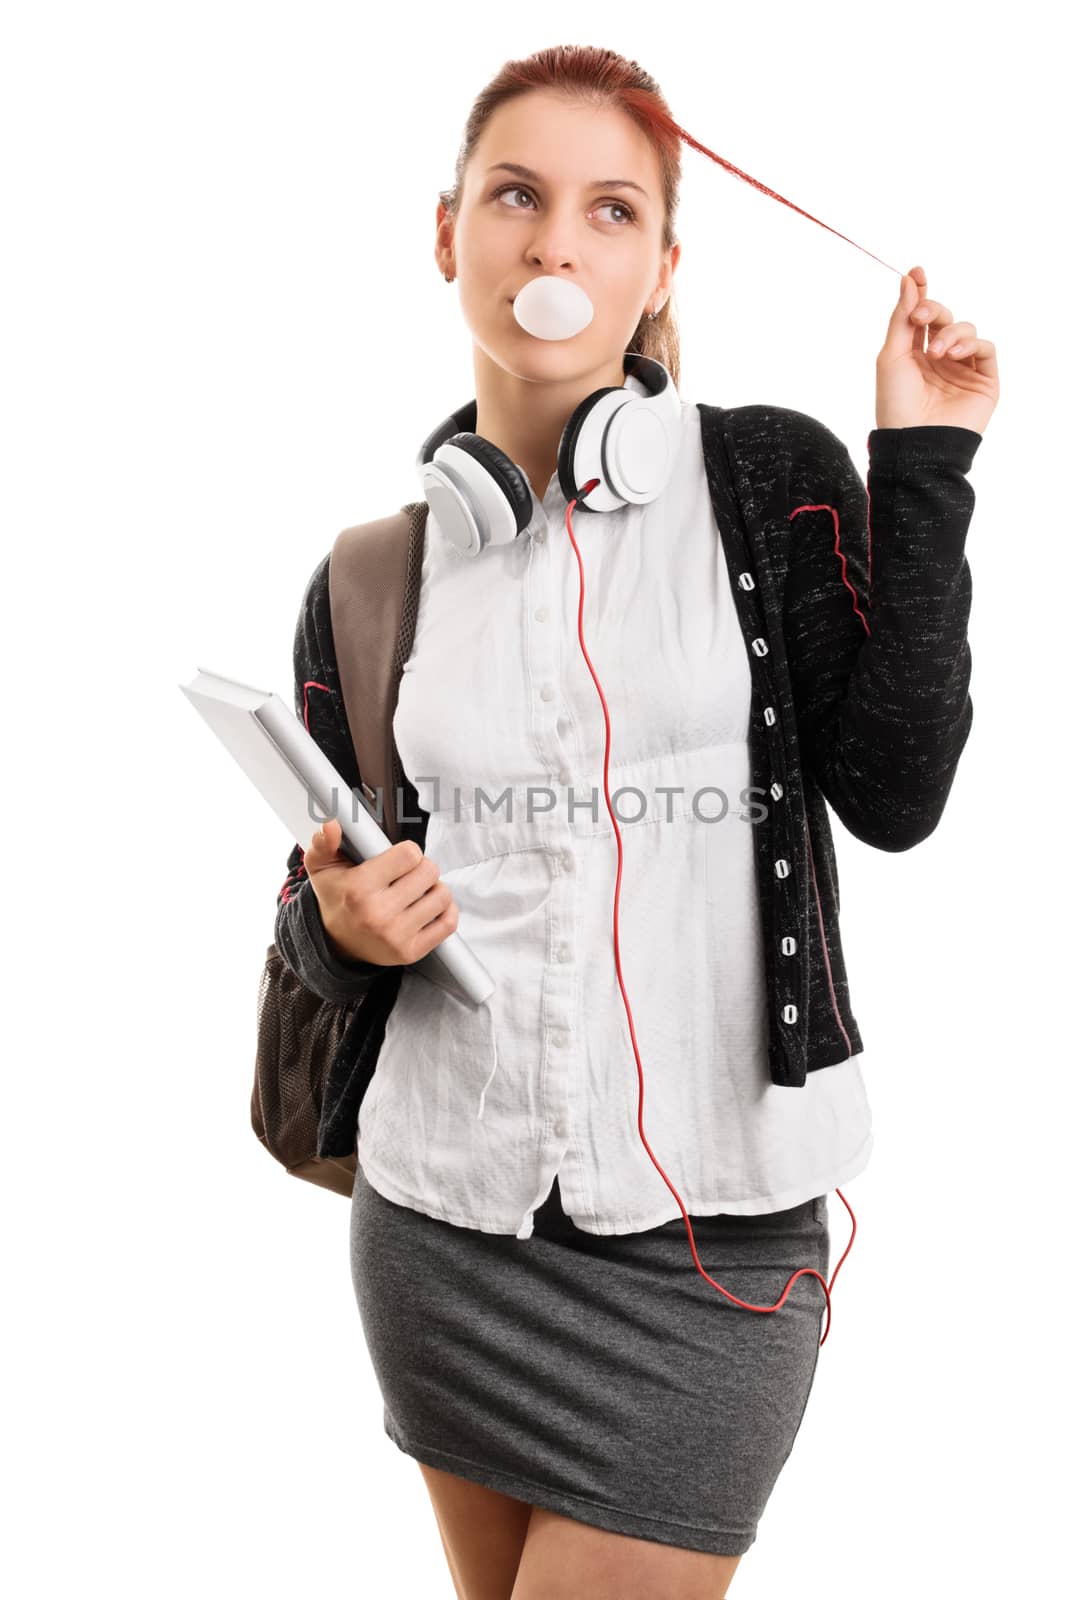 High school lifestyle. Young girl with books and backpack making bubble gum bubbles, playing with her hair, isolated on white background. Most popular girl in school.